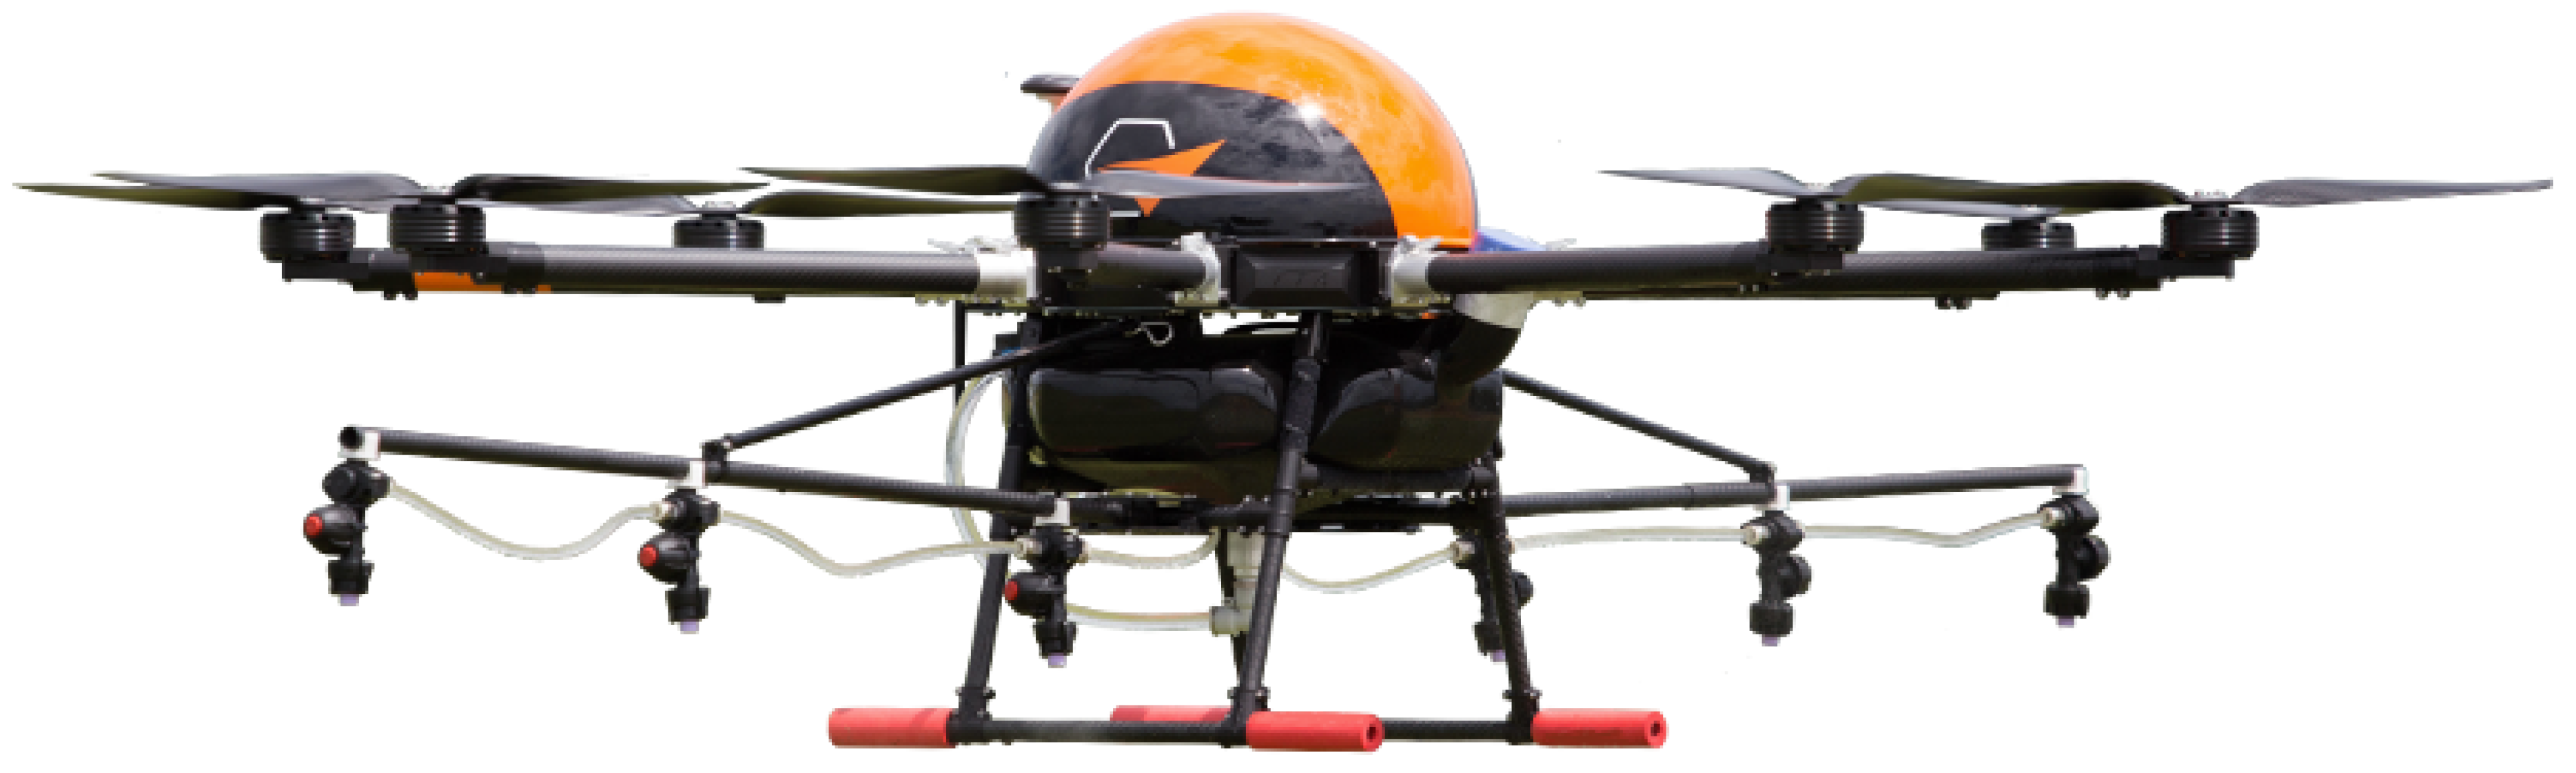 Drones | Free Full-Text | Evaluation of Altitude Sensors for a Crop  Spraying Drone